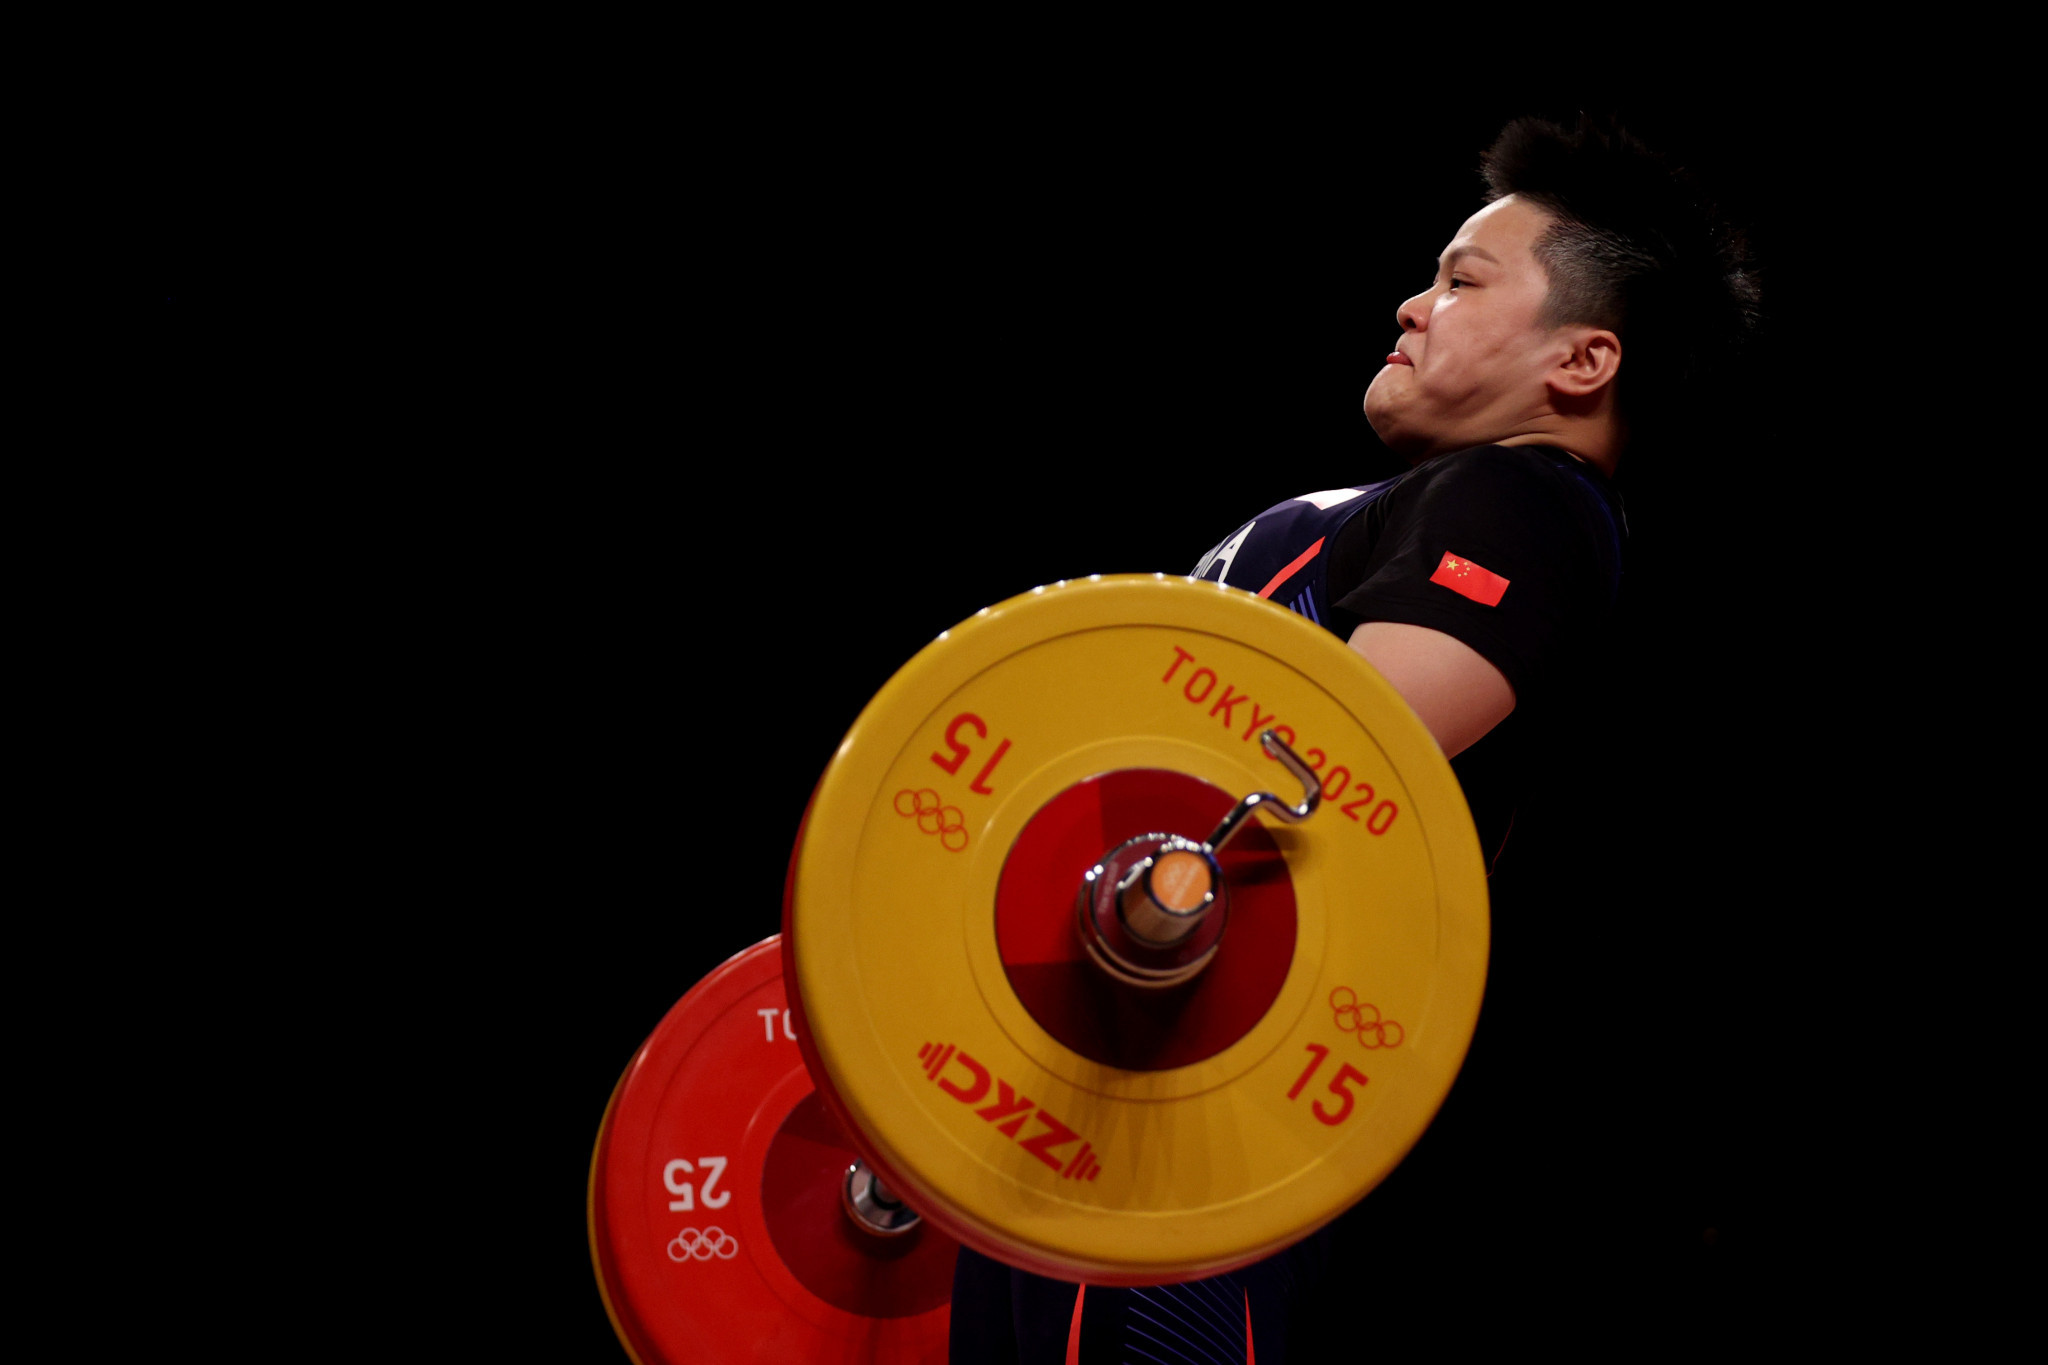 Wang Zhouyu of China is in contention for the women's 81kg title ©Getty Images